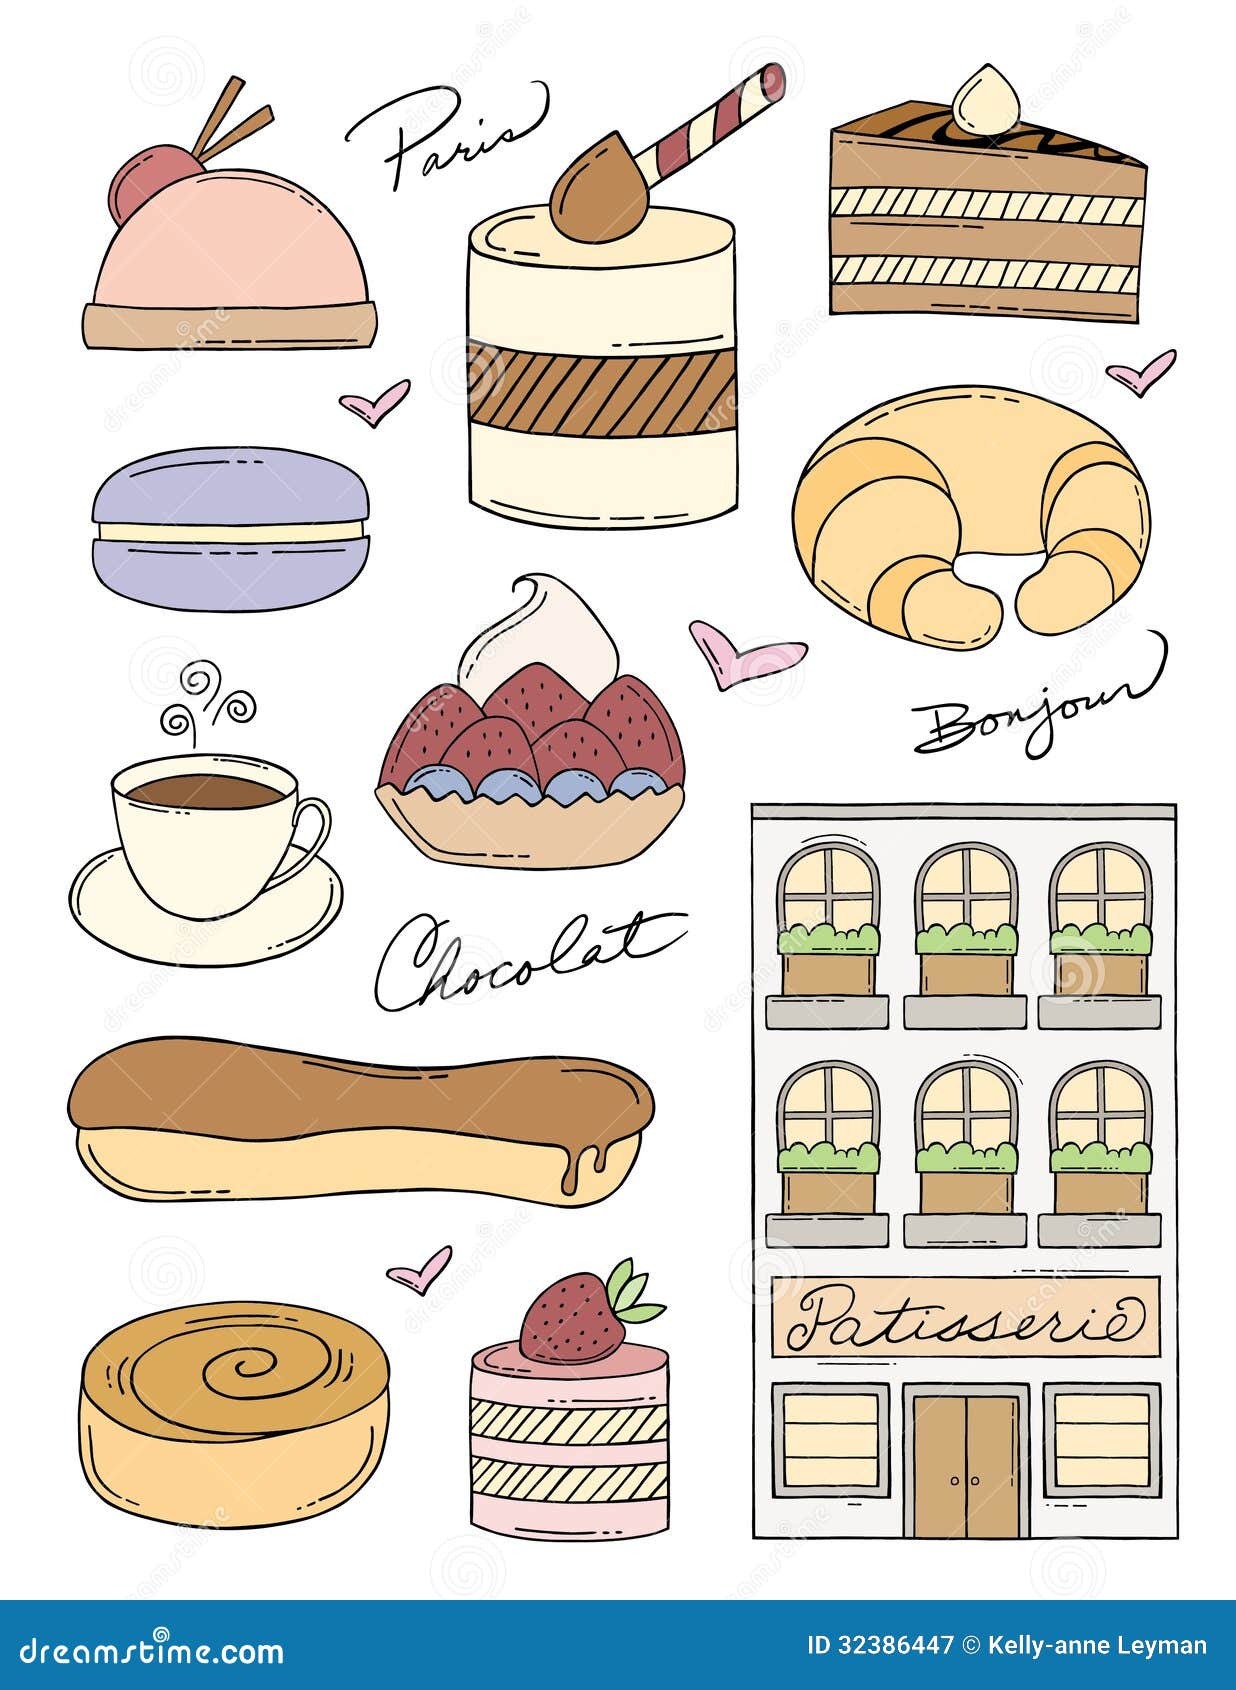 French Bakery Doodles stock vector. Illustration of doodle - 32386447